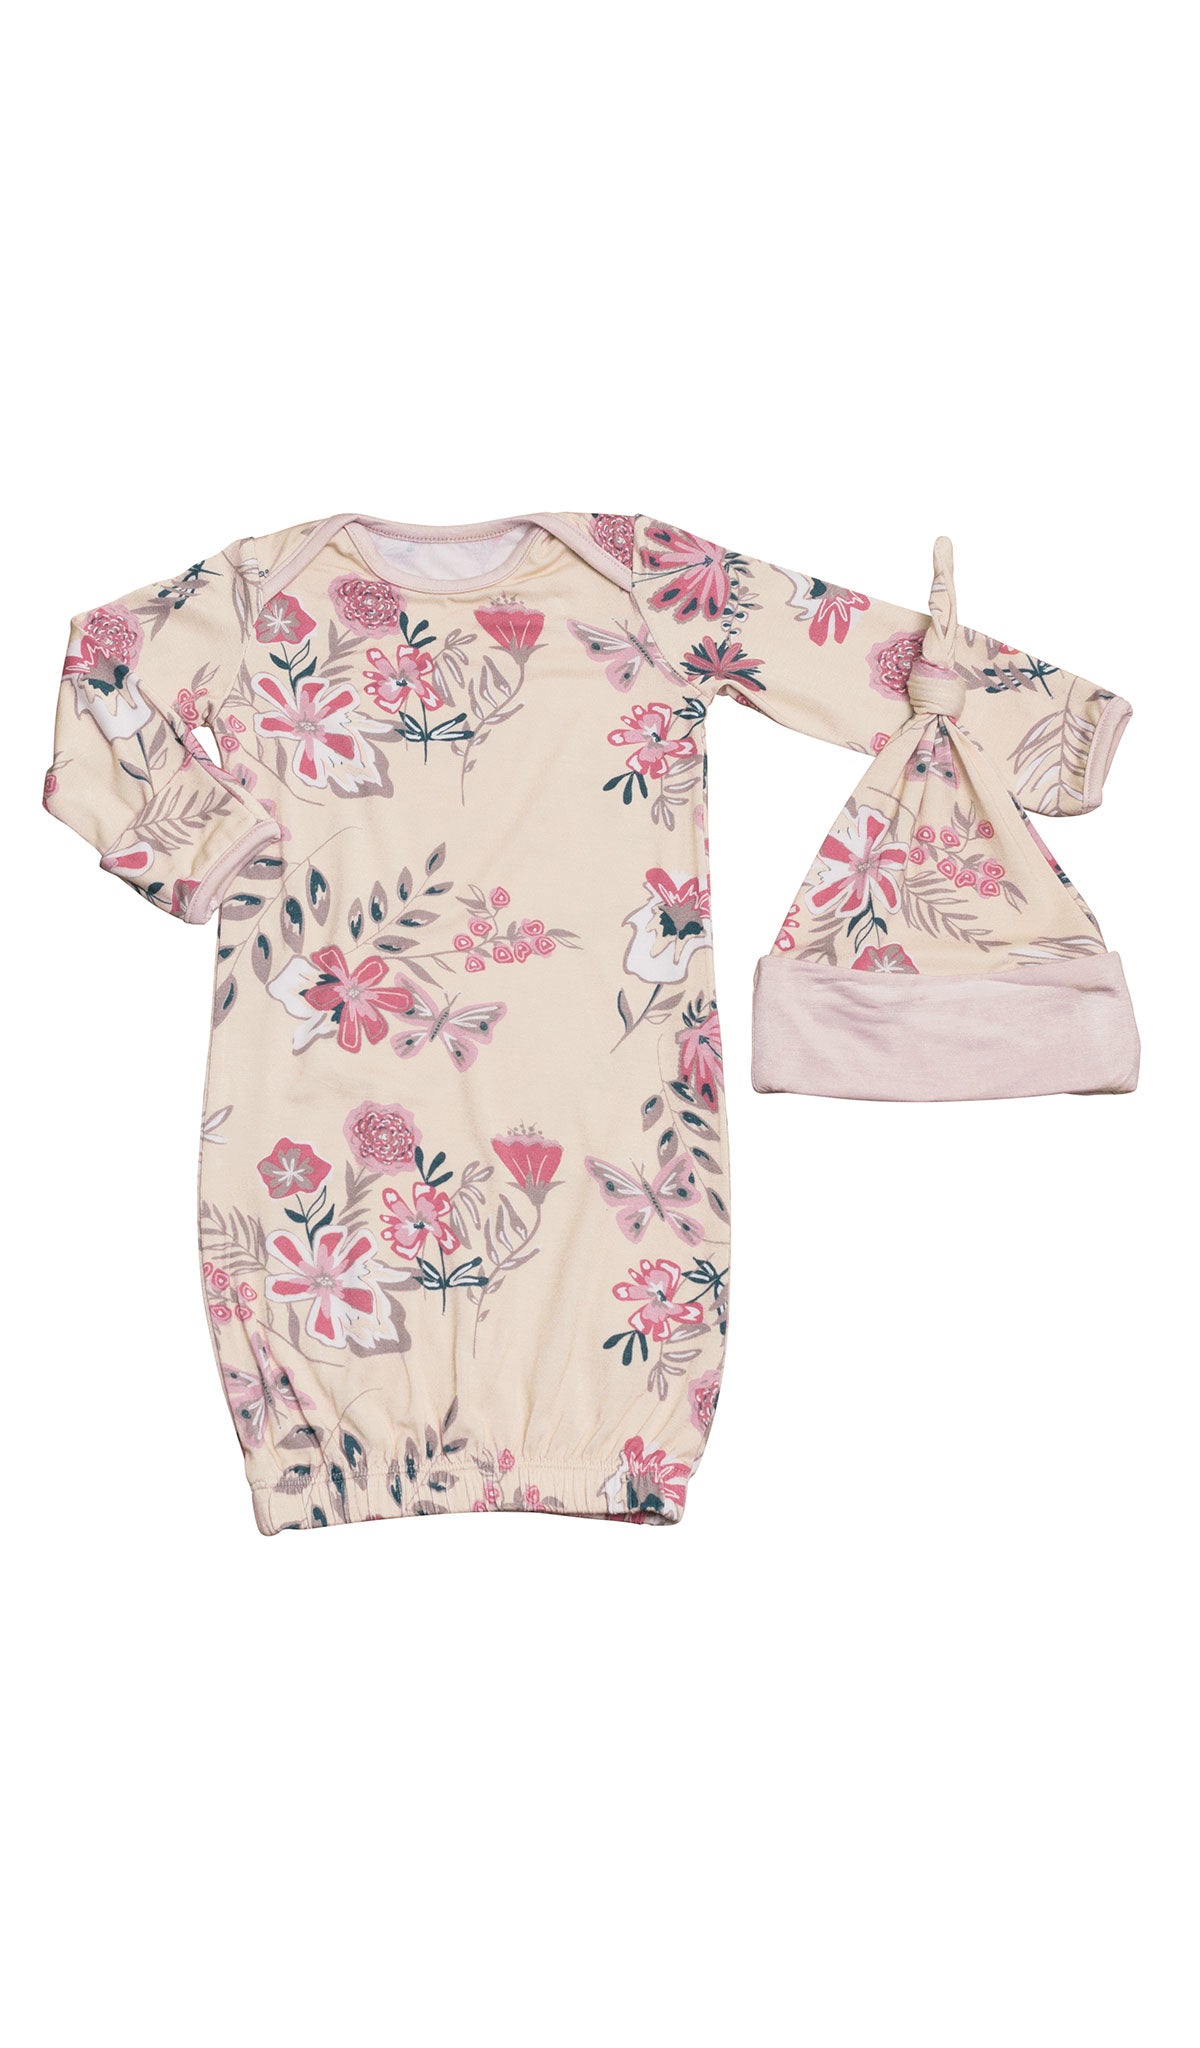 Wild Flower Analise 5-Piece Set, gown and knotted hat for baby.